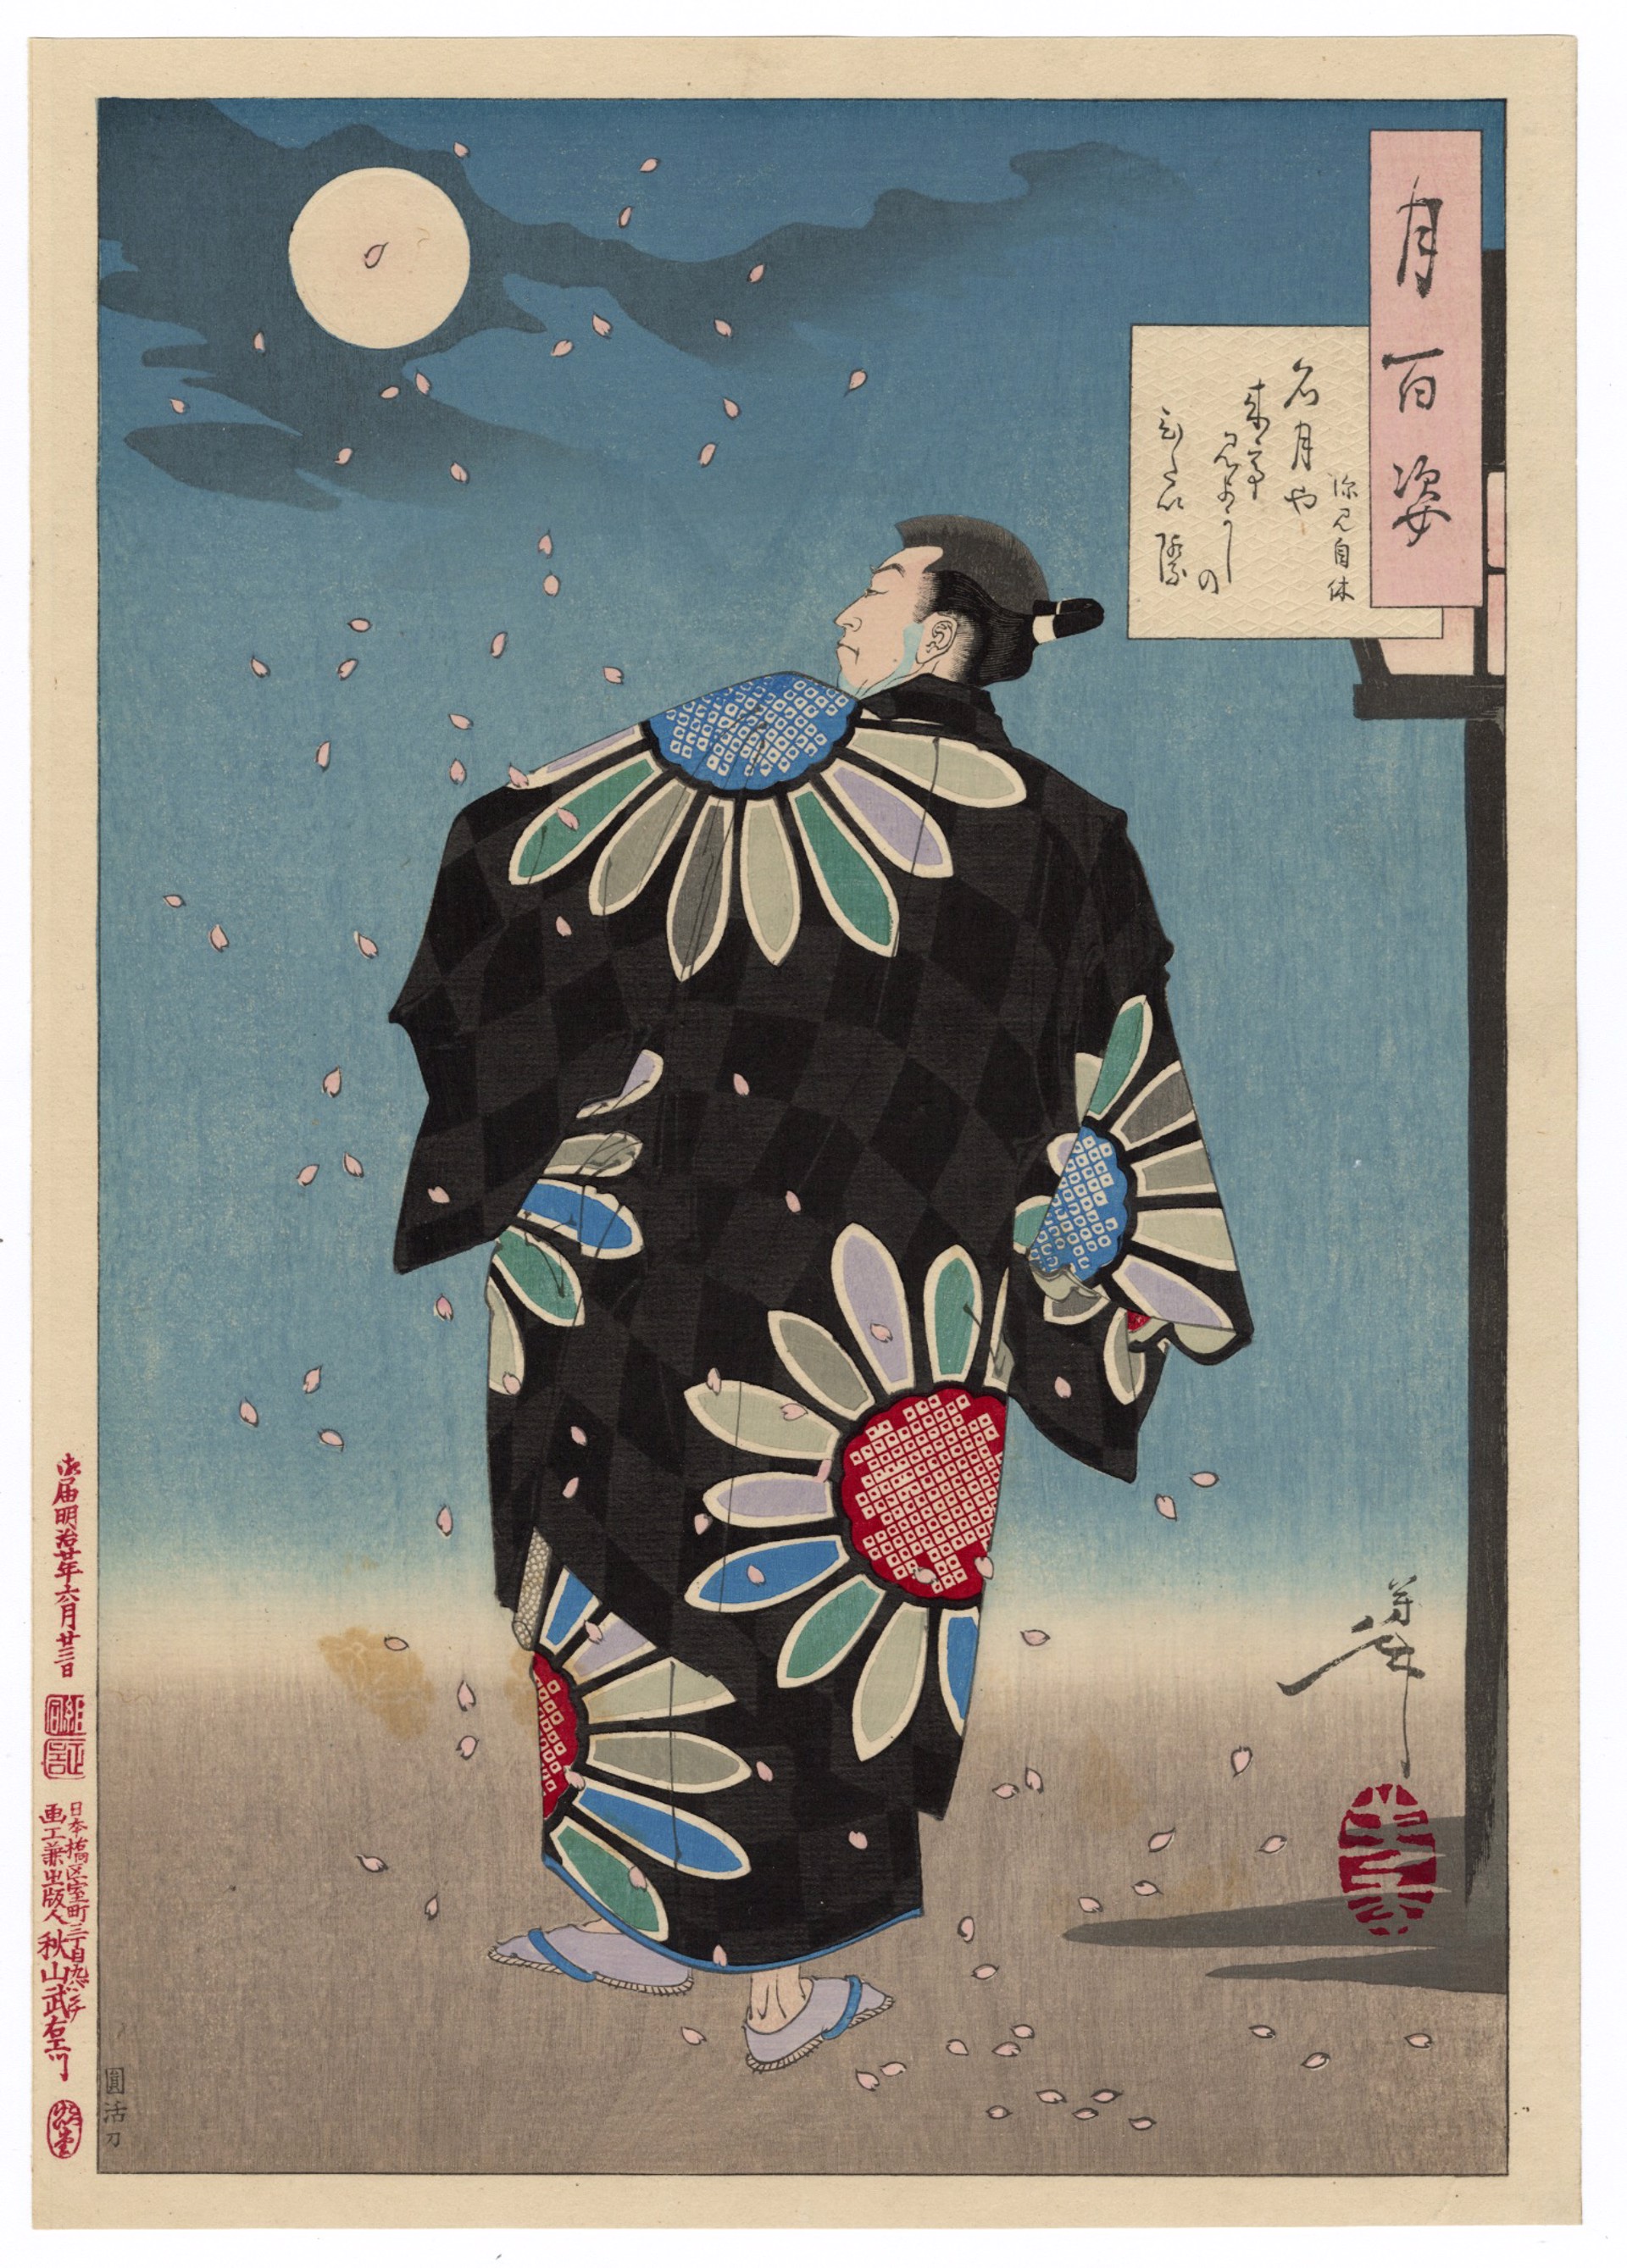 Fukami Jikyu - The Full Moon Coming with a Challenge to Flaunt its Beautiful Brow by Yoshitoshi